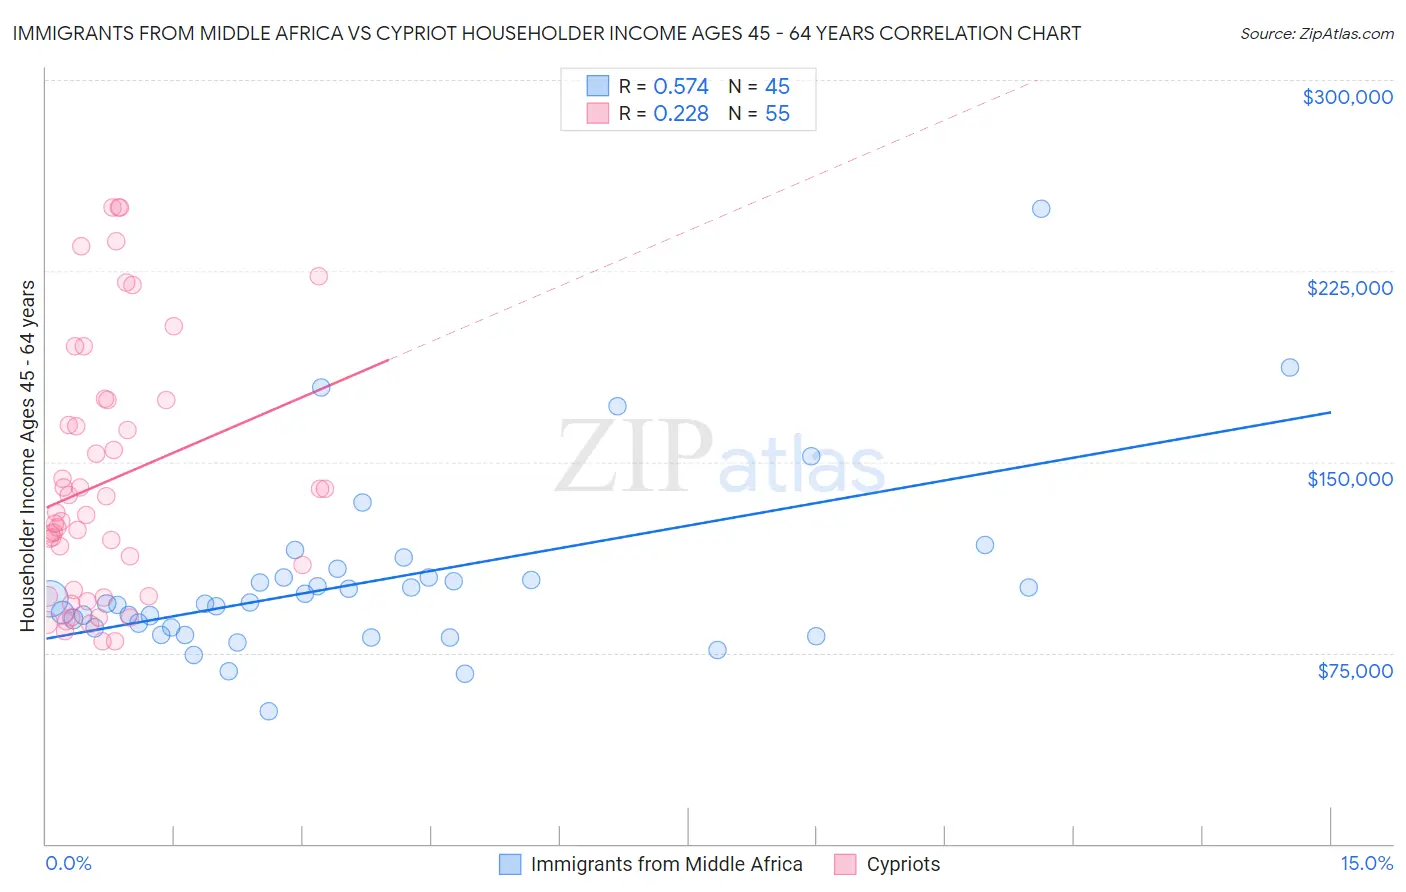 Immigrants from Middle Africa vs Cypriot Householder Income Ages 45 - 64 years